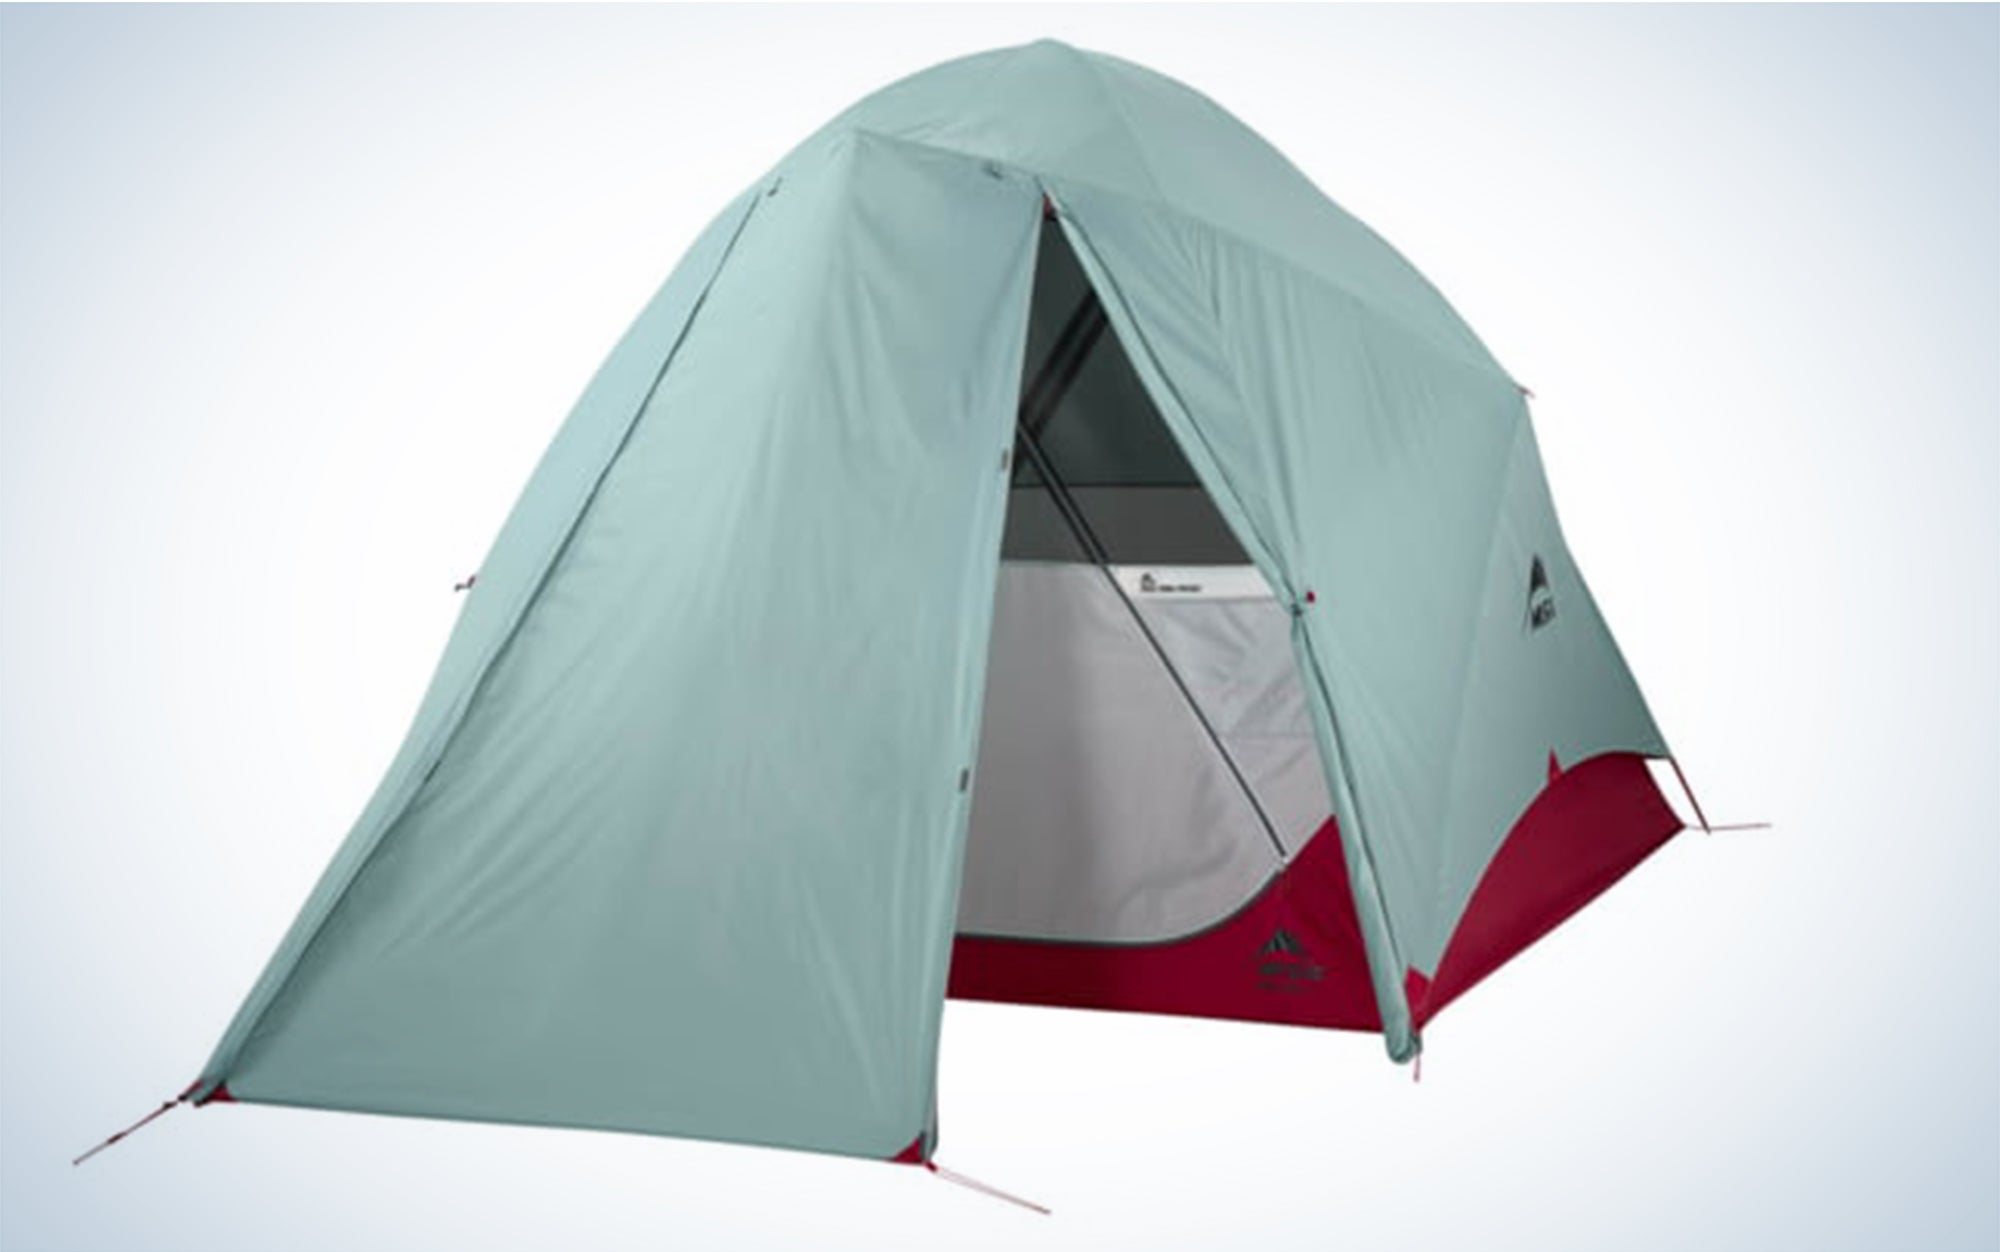 The MSR Habiscape is one of the best camping tents.